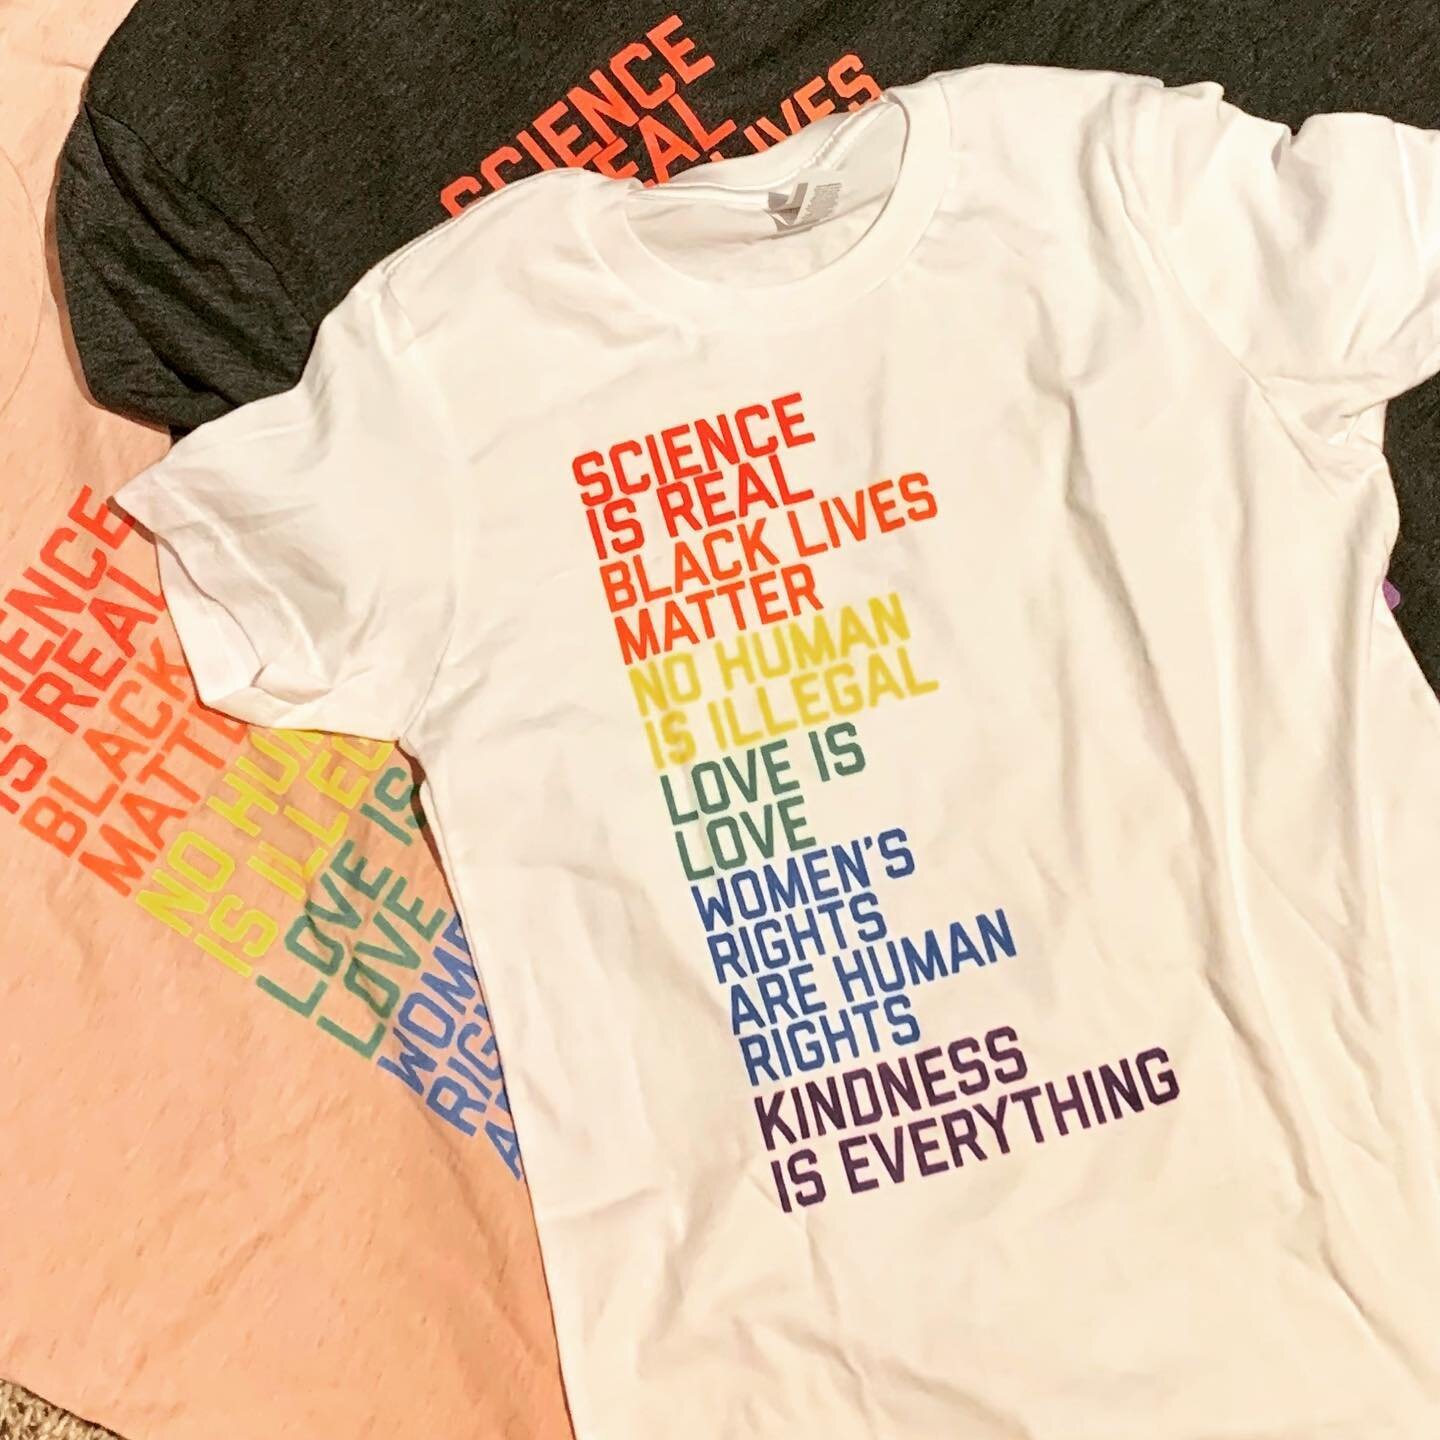 So excited to have received our @landbridgeapparel shirts.🌈 Edit: these are so soft and slim fit. Husband and daughter both say they fit perfectly Highly recommend. Thanks @thehomeedit! (Saw on her tiktok)✨ These may make our holiday card this year.